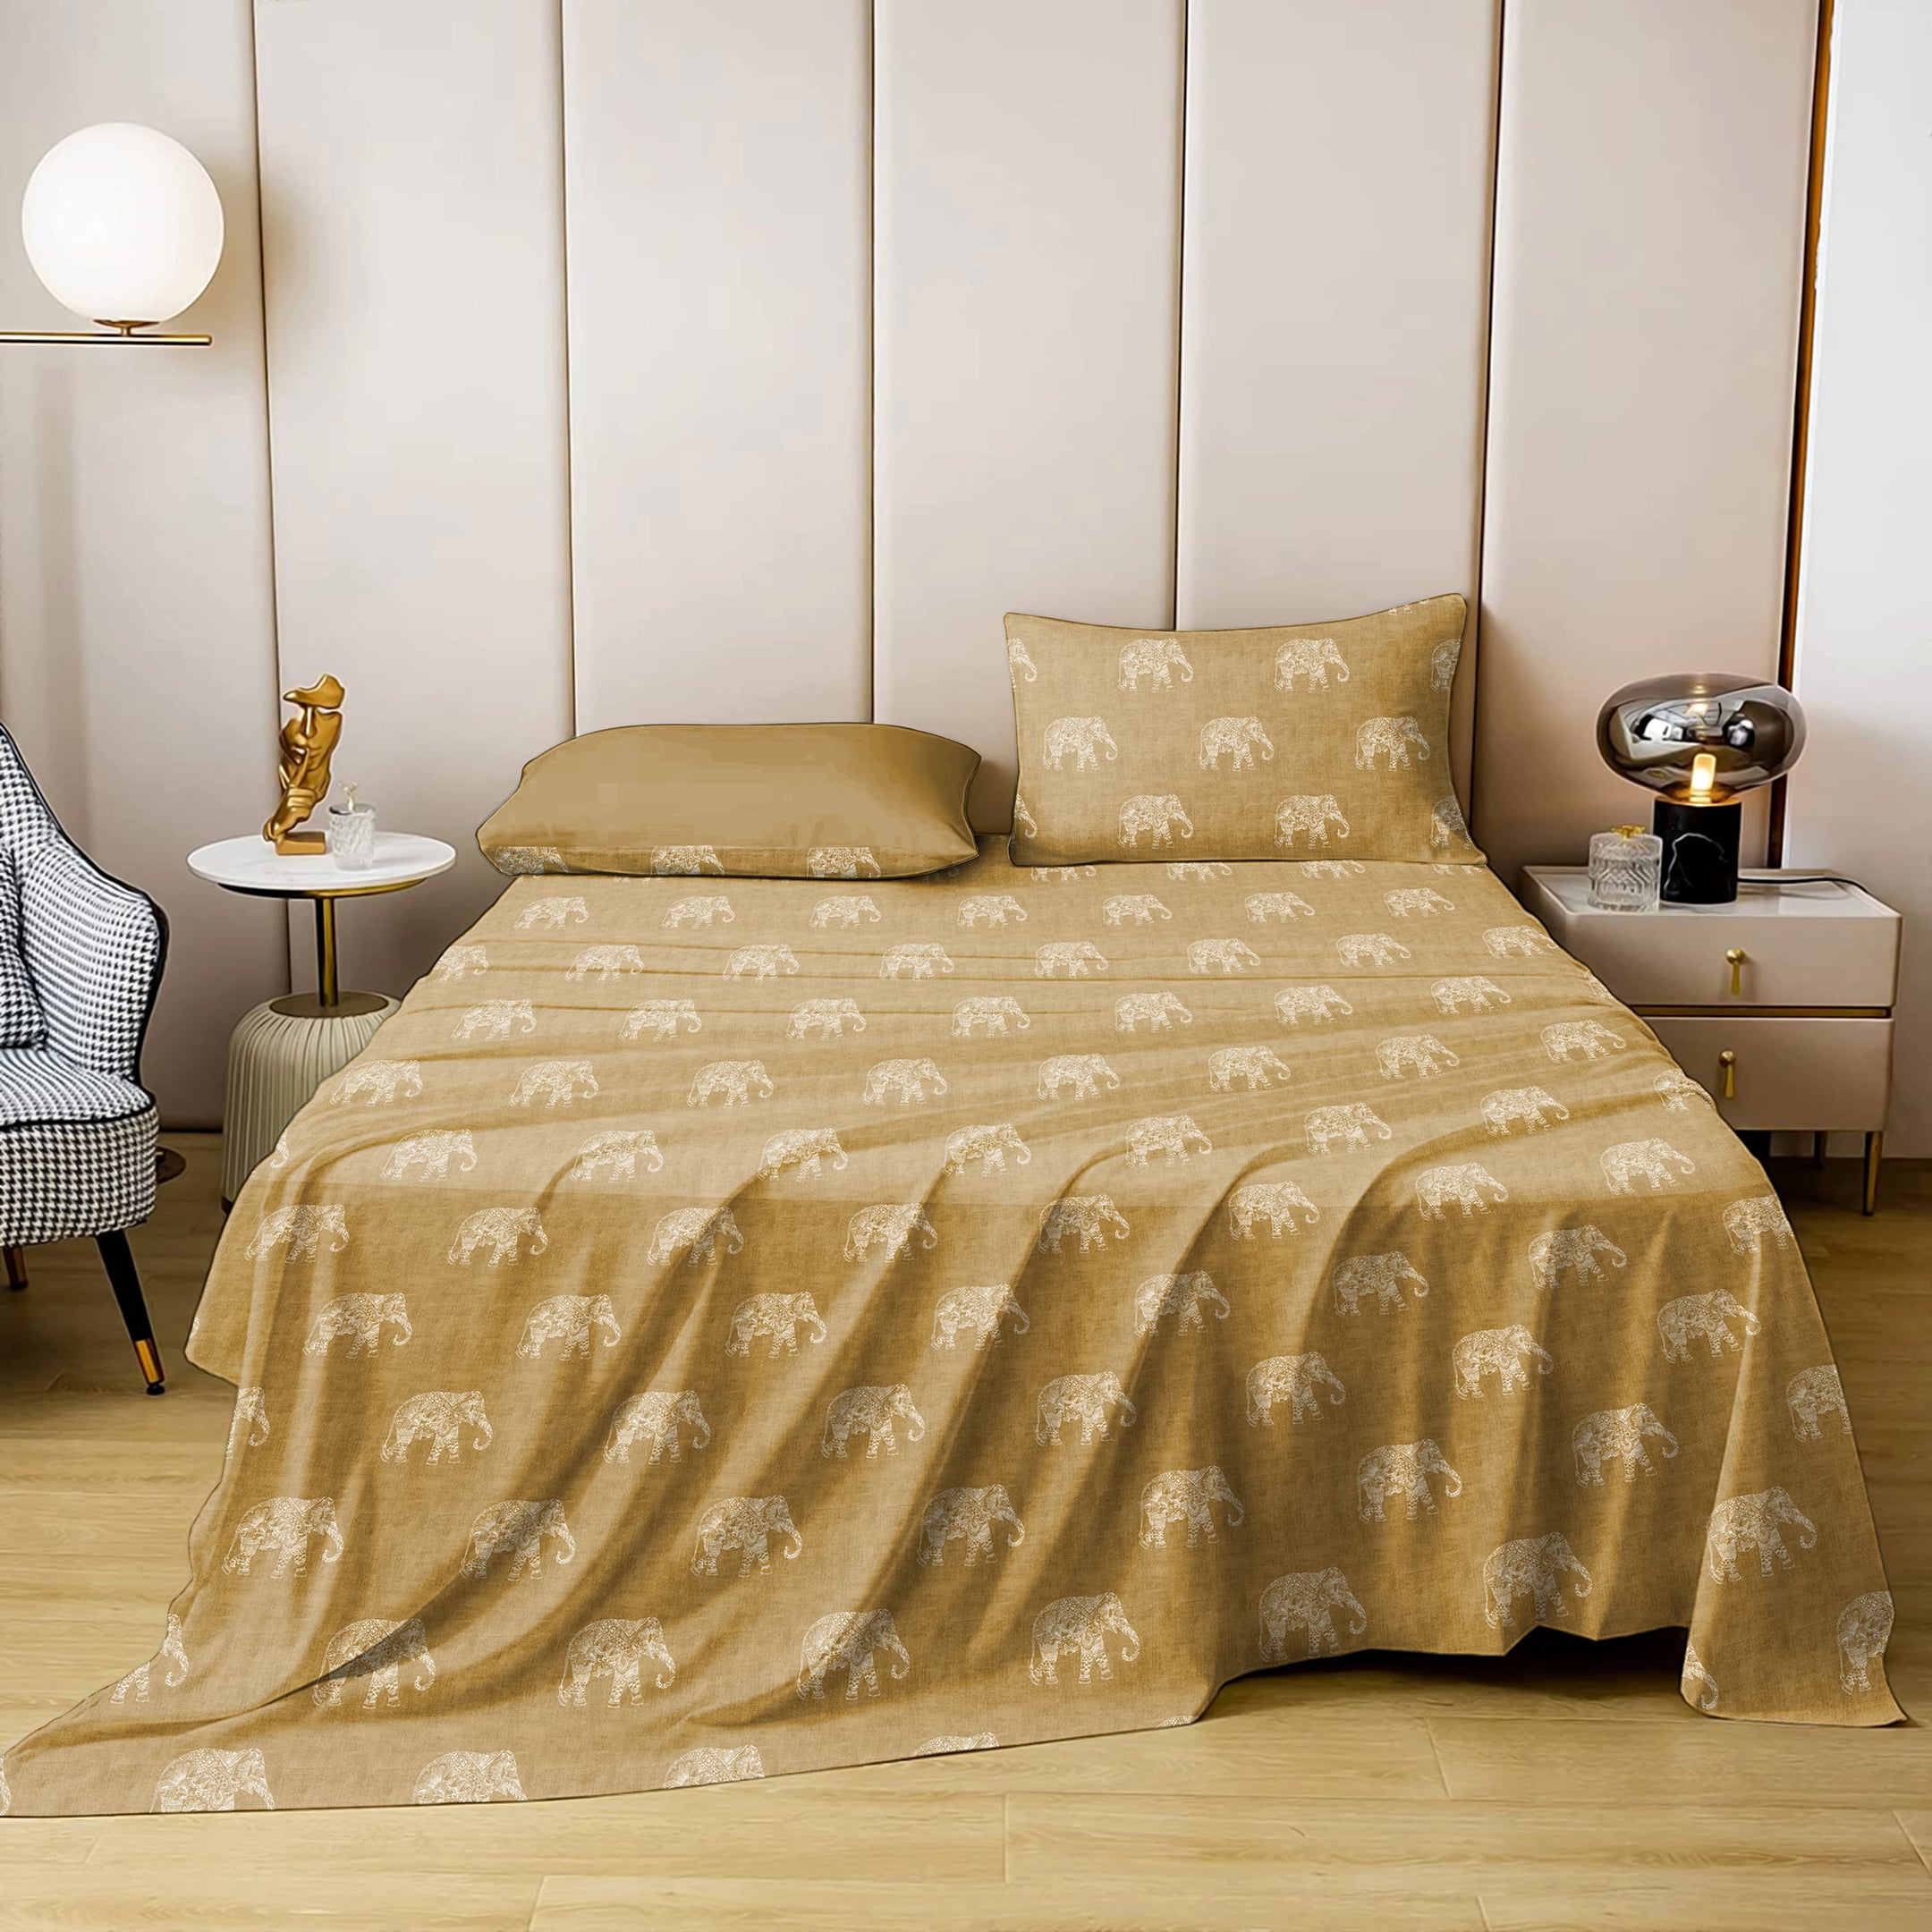 Jodhpur Elephant Bedsheet for Double Bed with 2 PillowCovers King Size (104" X 90") Camel